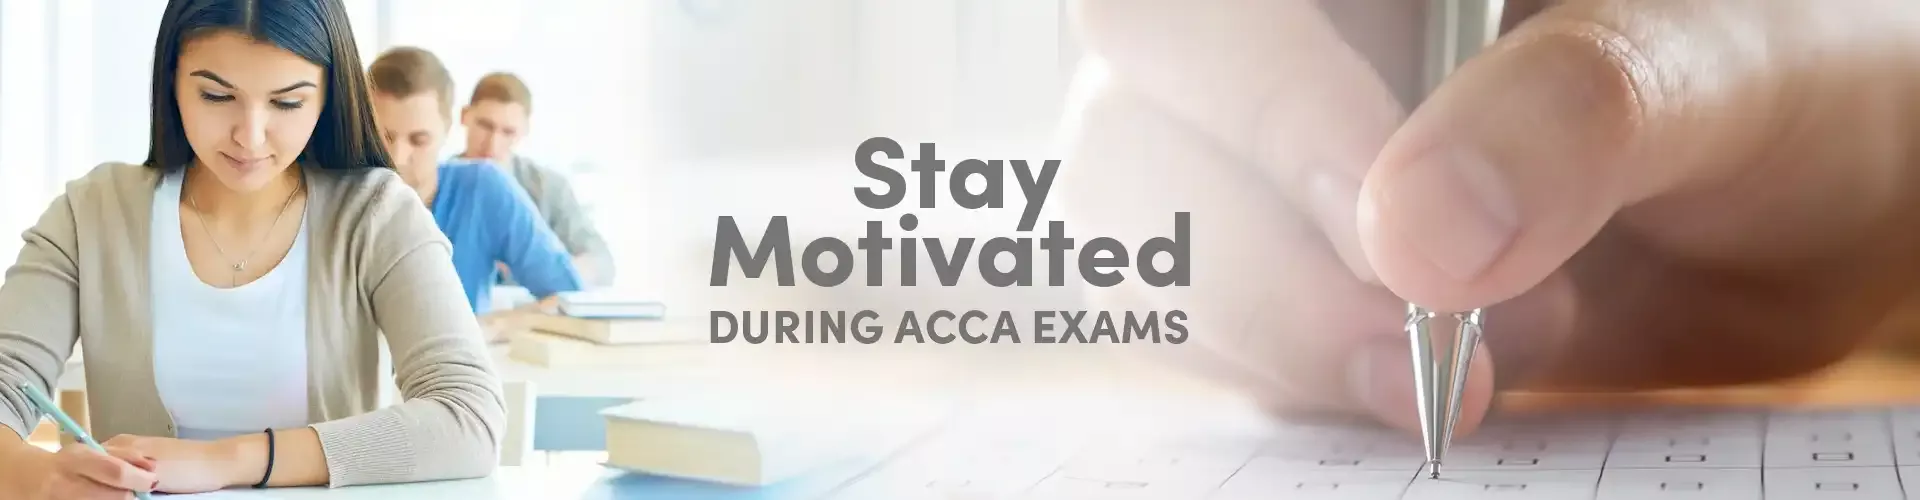 How to Stay Motivated During ACCA Exams